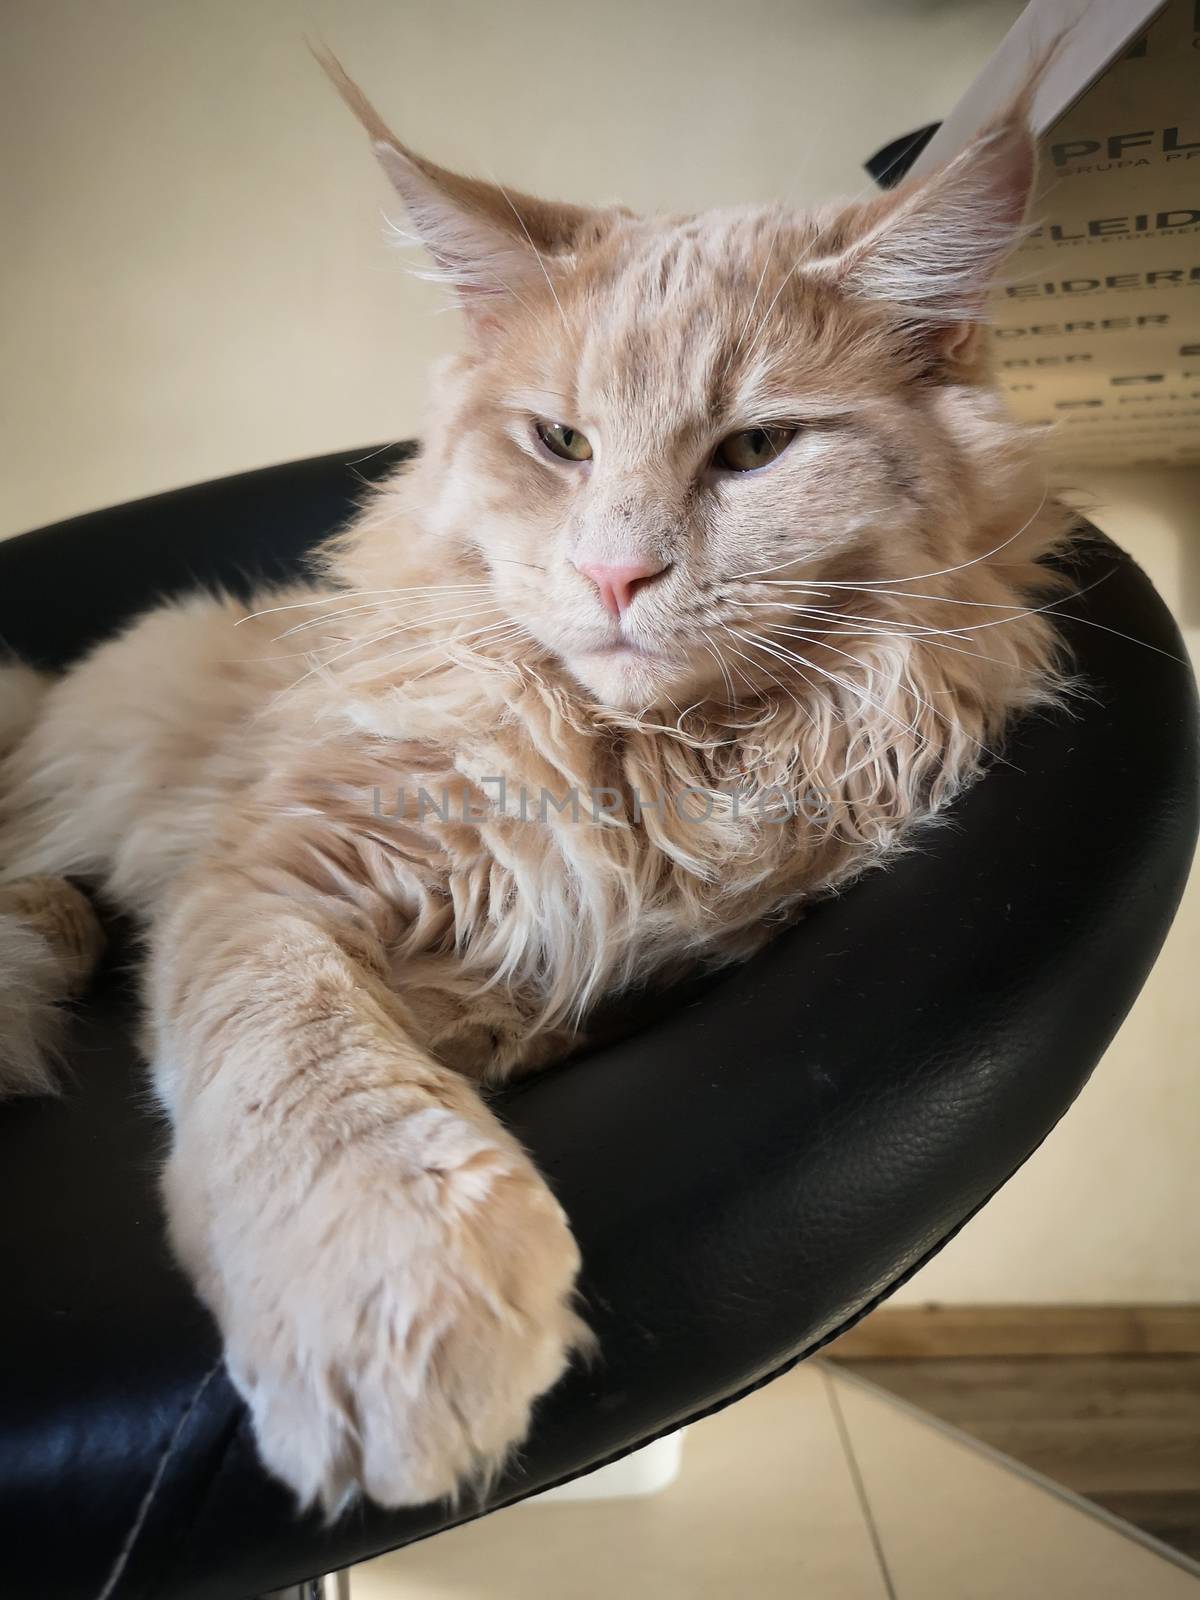 Fluffy ginger beige maine coon cat lying on a black bar chair front view.